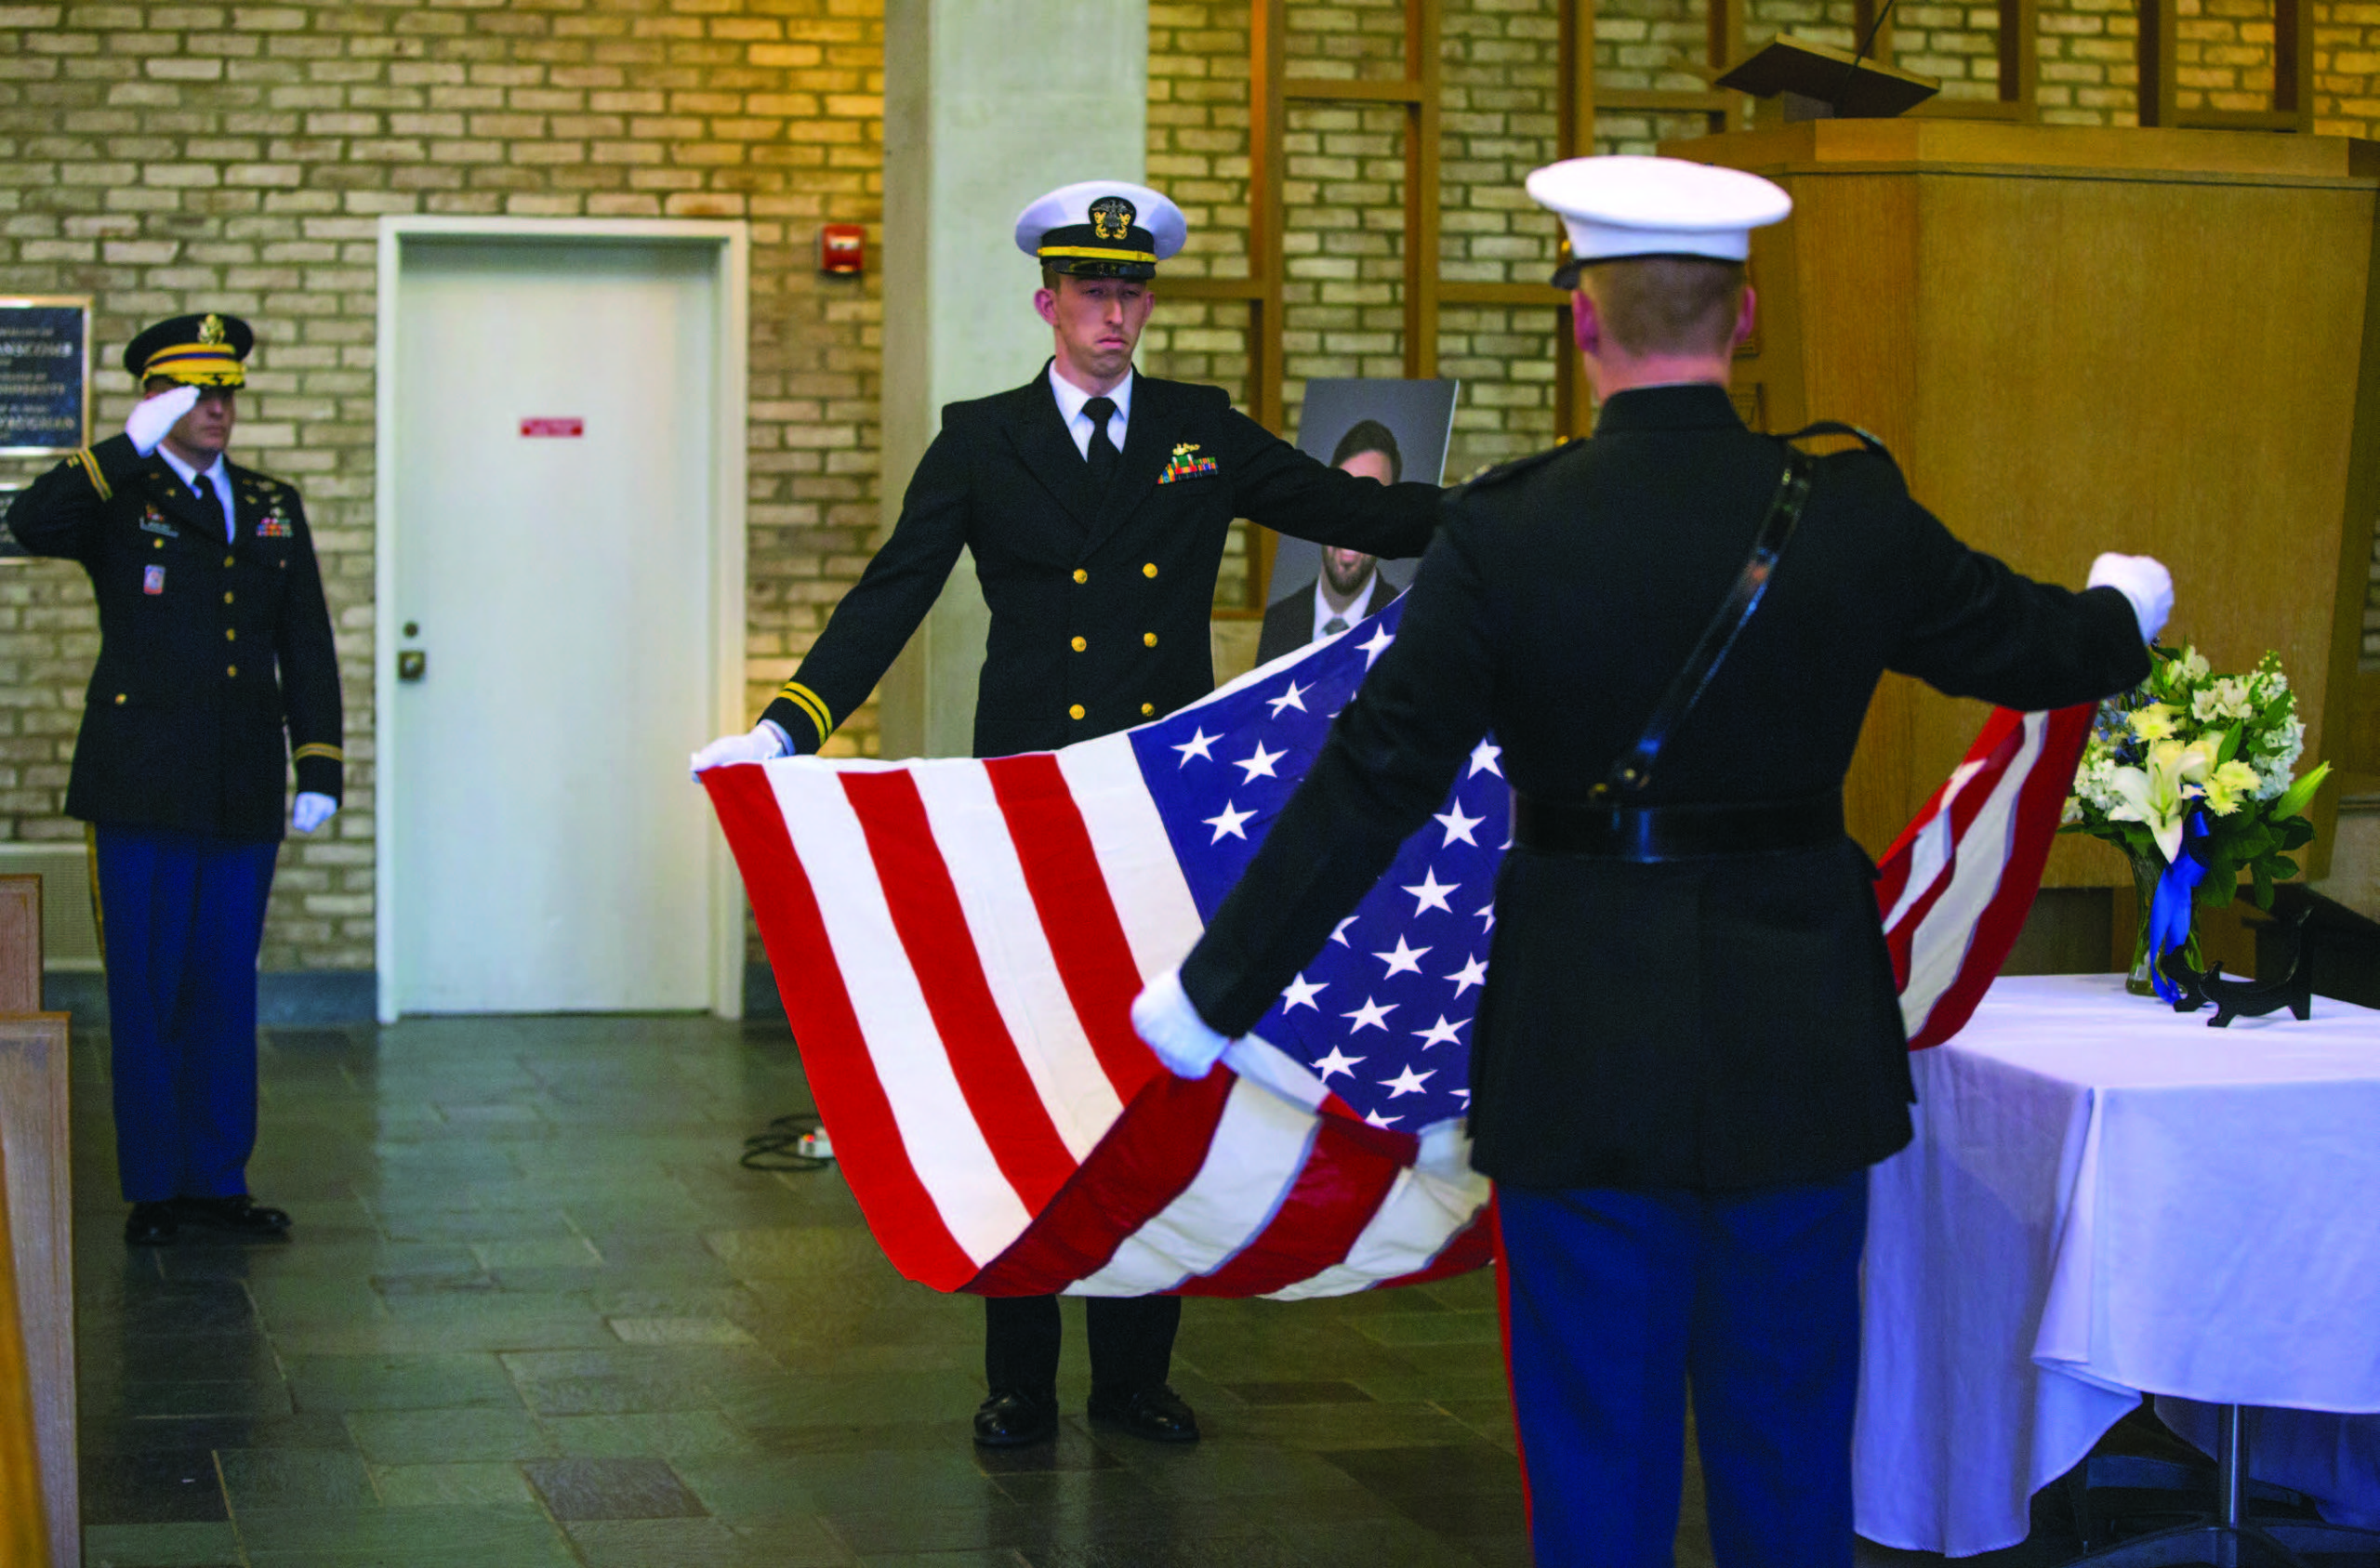 A memorial was held in Benton Chapel on March 18 for first-year MBA student Taylor Allen Force.